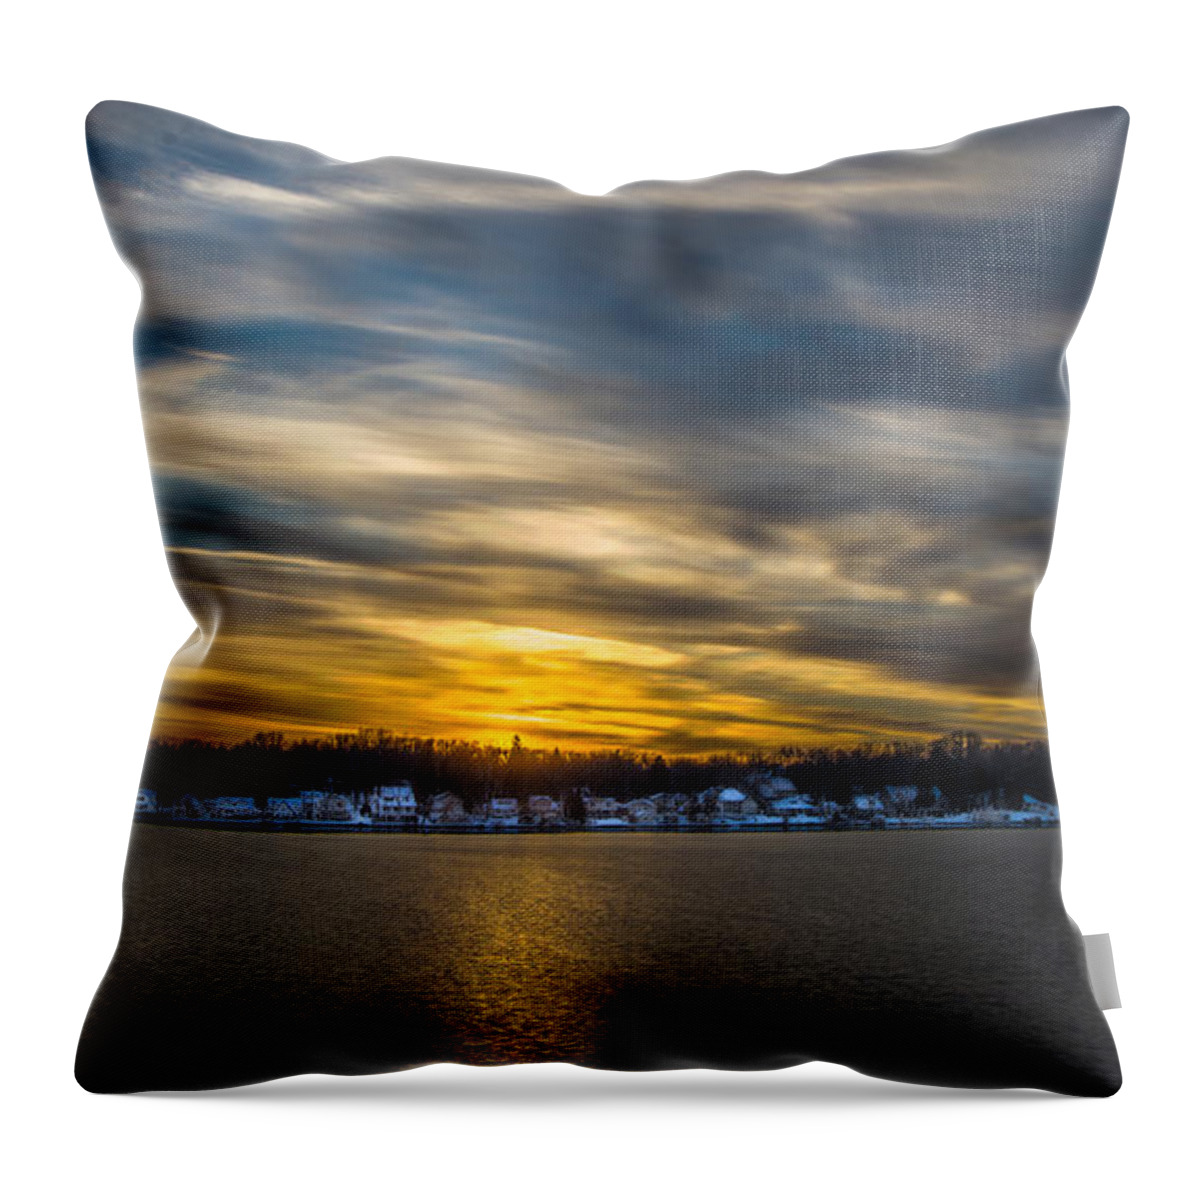 2012 Throw Pillow featuring the photograph Sunset Over Snow Covered Village by Randy Scherkenbach